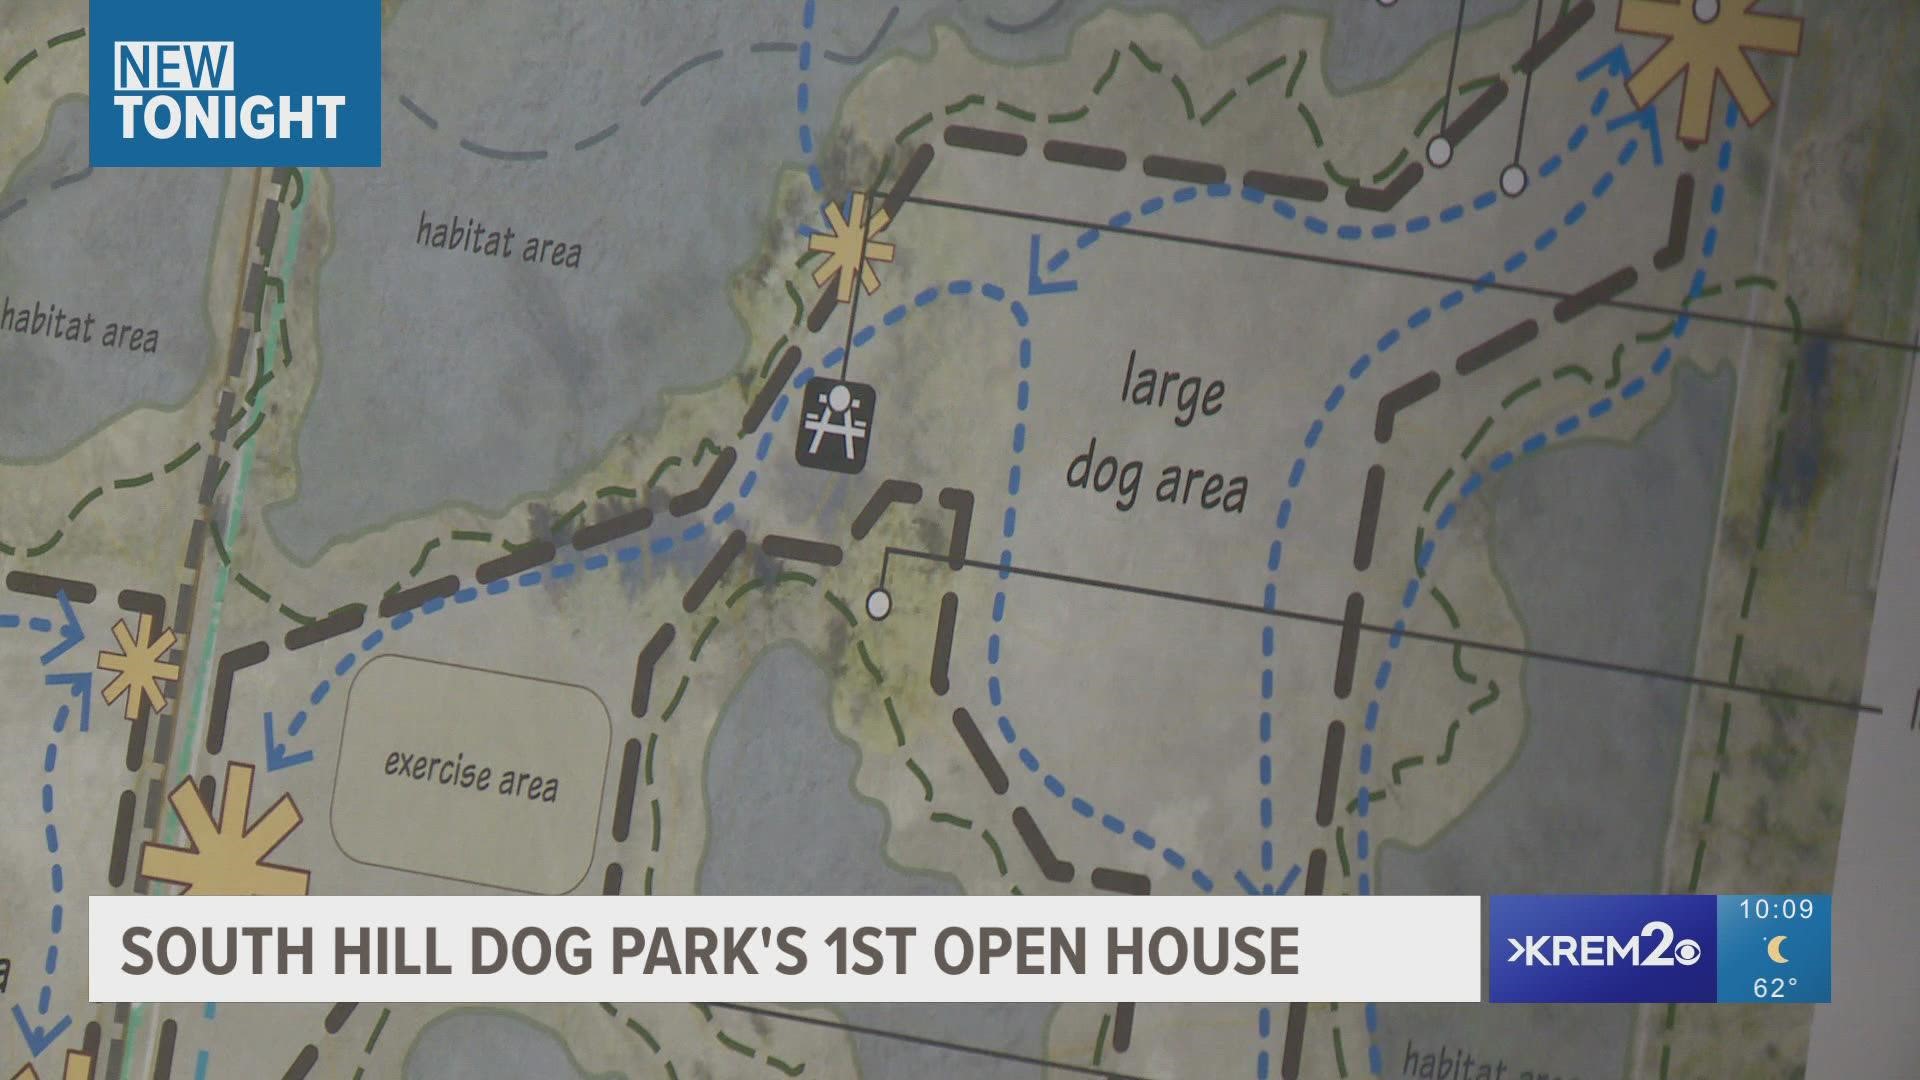 On Monday night, the City held the first of four meetings to discuss where the official South Hill dog park will be built.